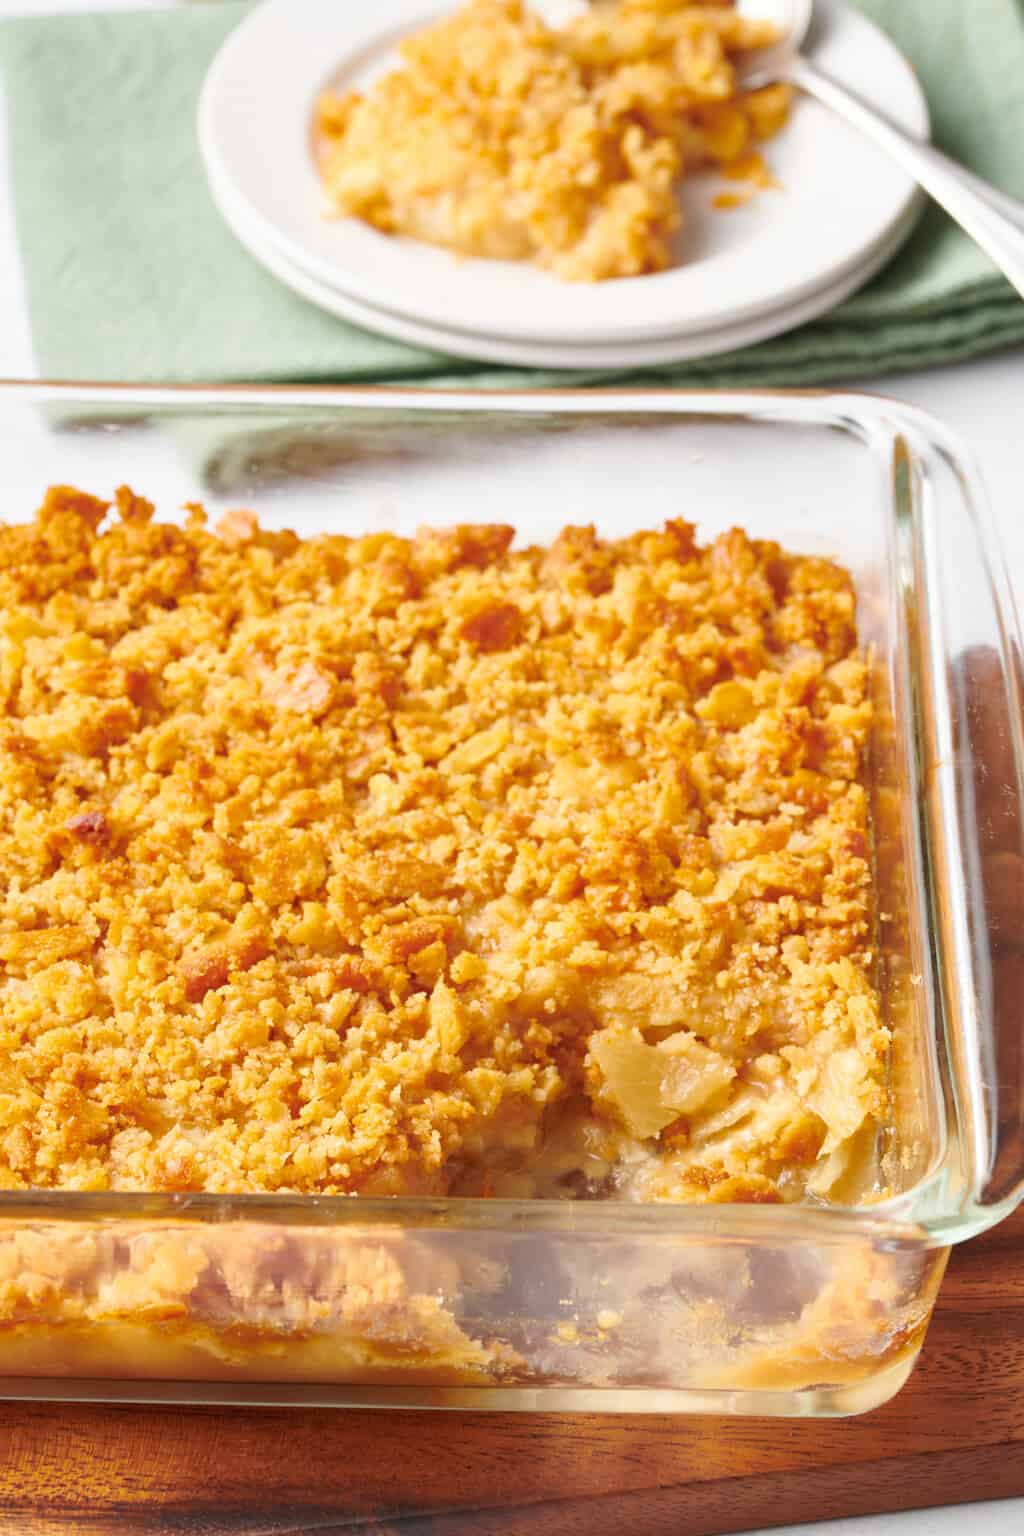 Southern Pineapple Casserole Recipe | All Things Mamma